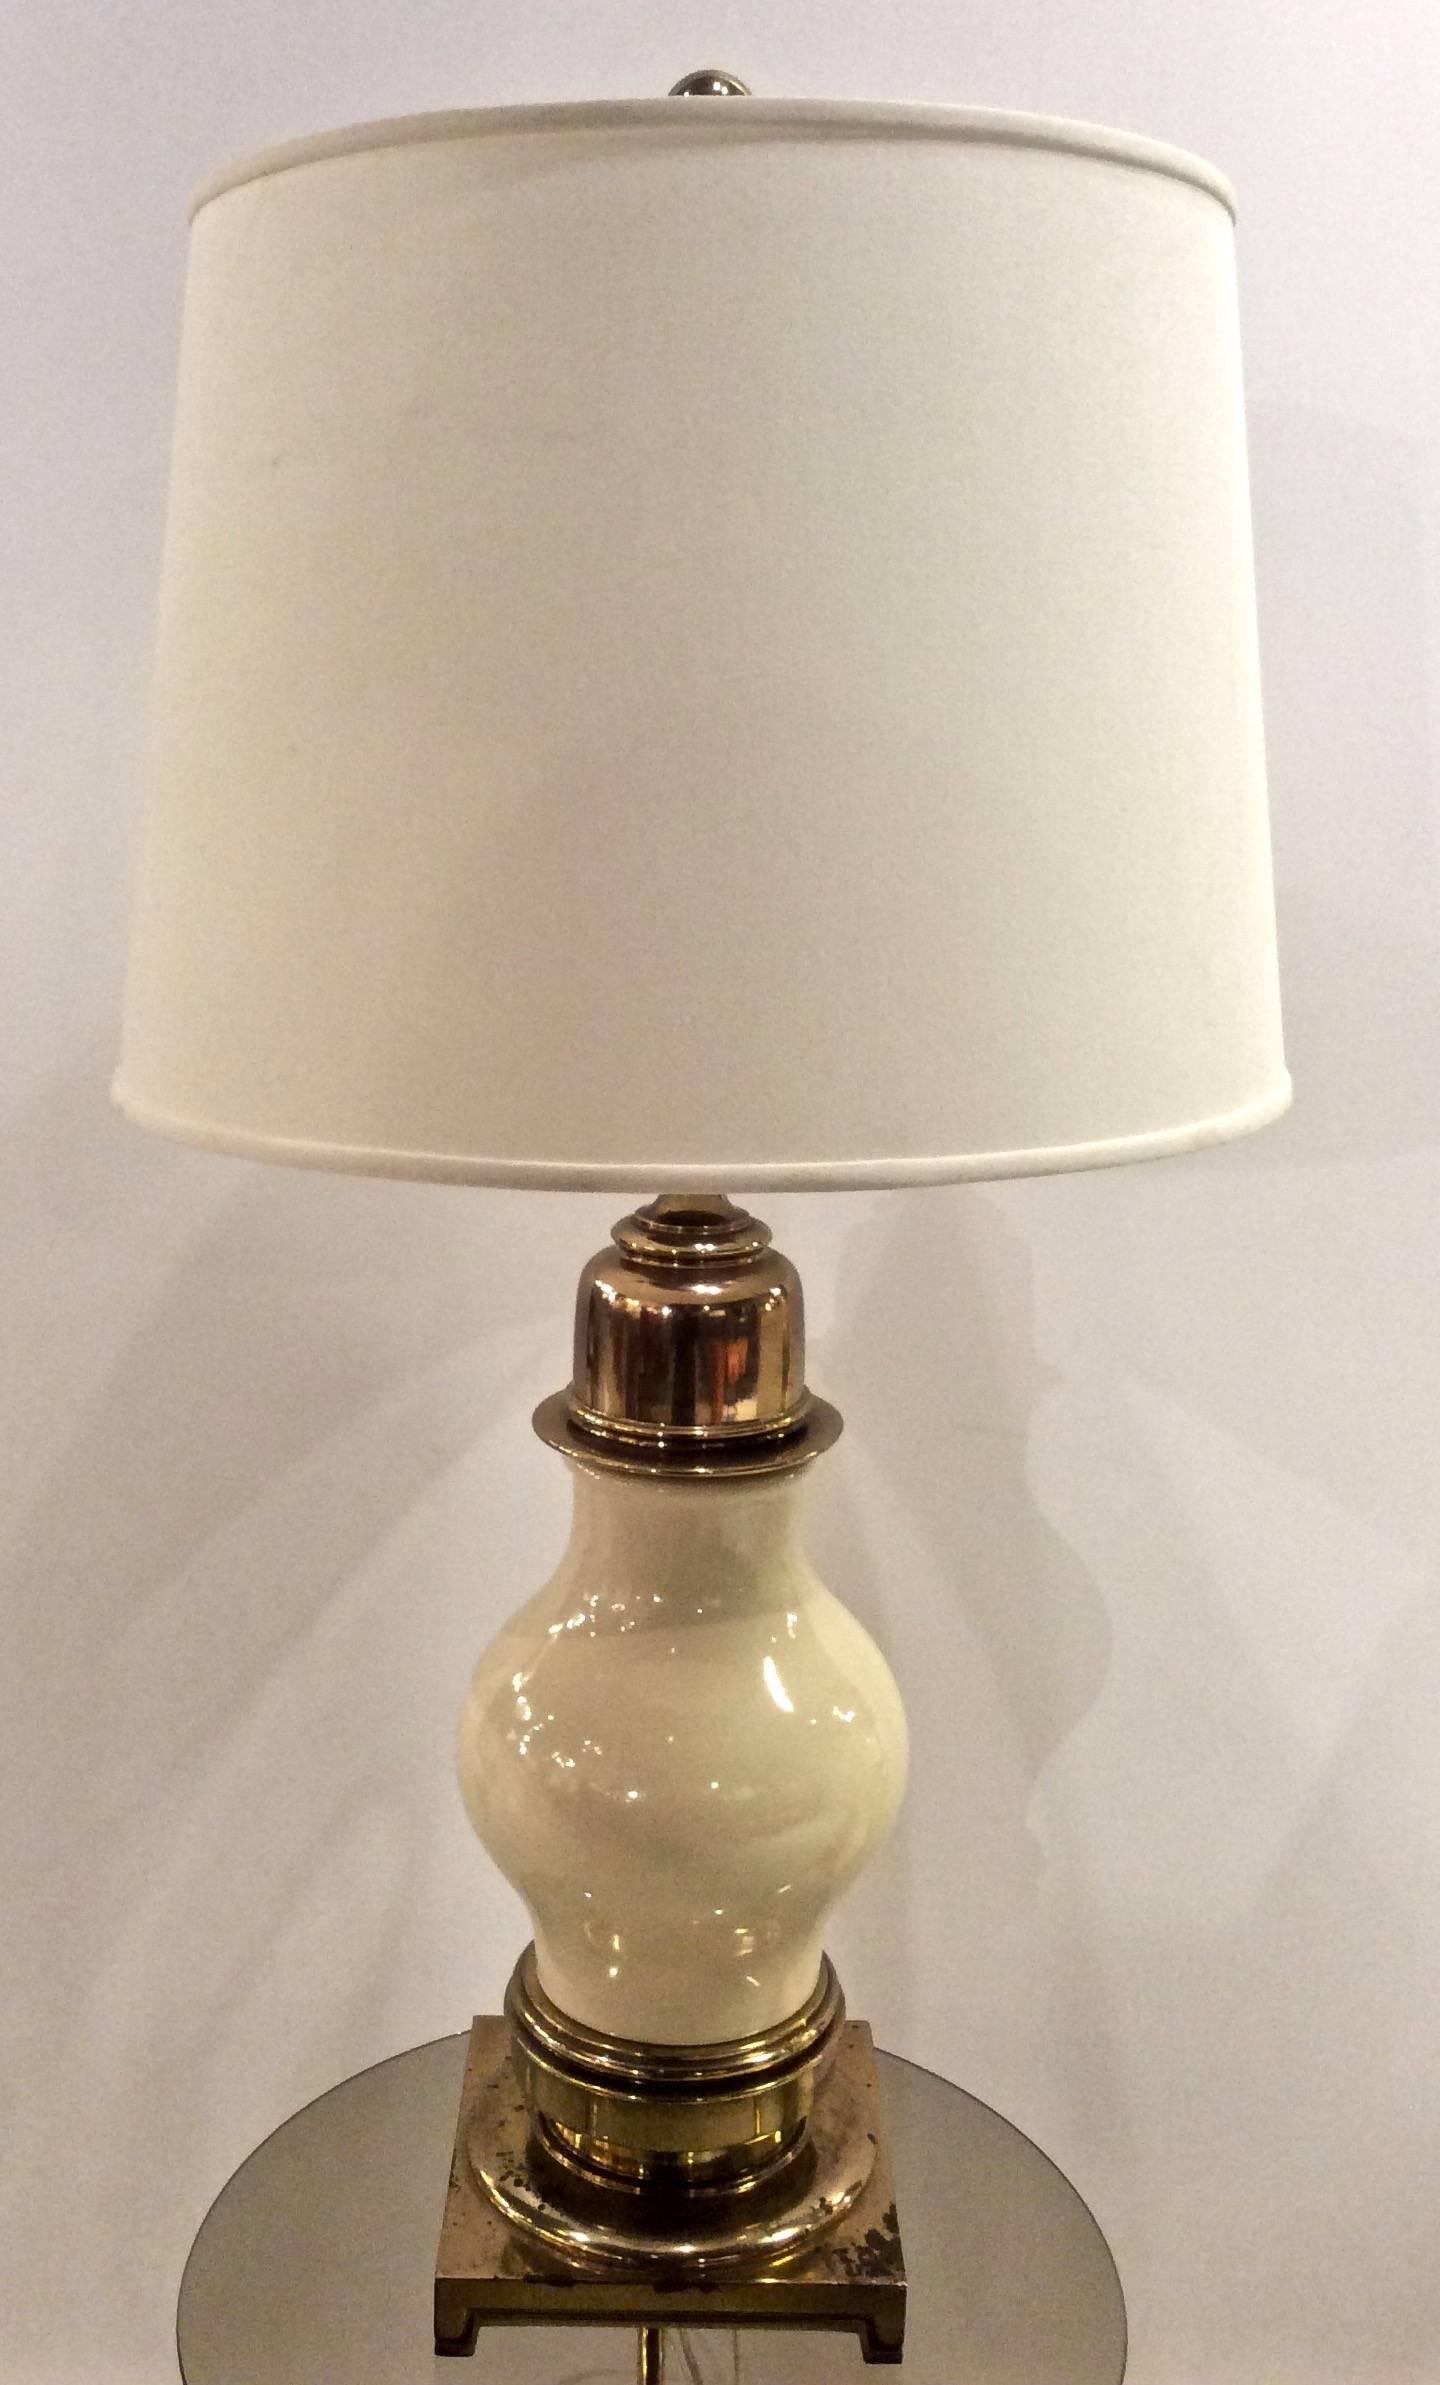 Impressive Pair of Mid-Century Ceramic and Brass Table Lamps, by Stiffel 1